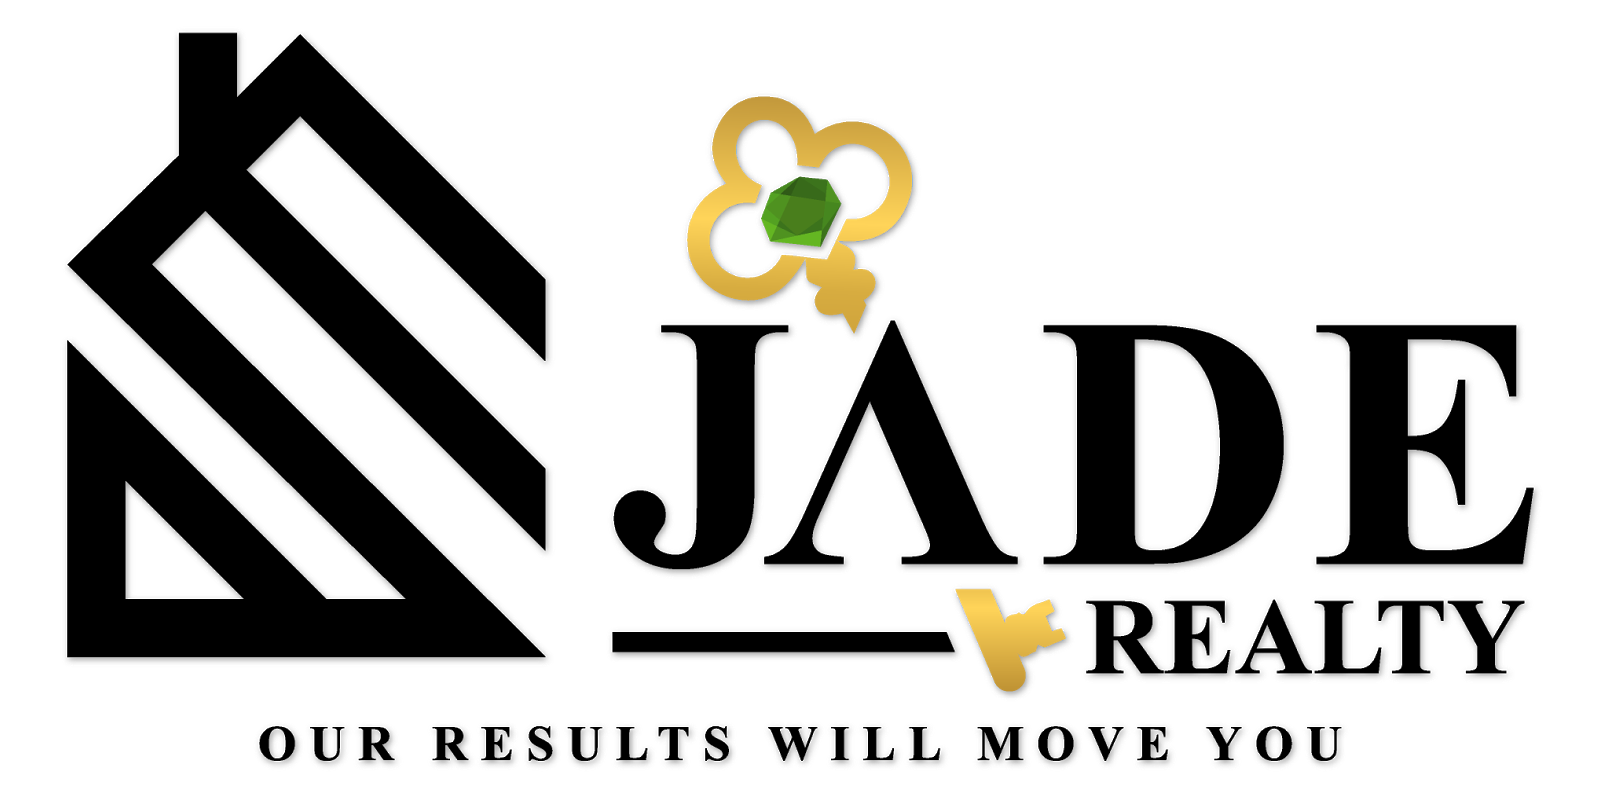 Jade Realty- Our Results Will Move You